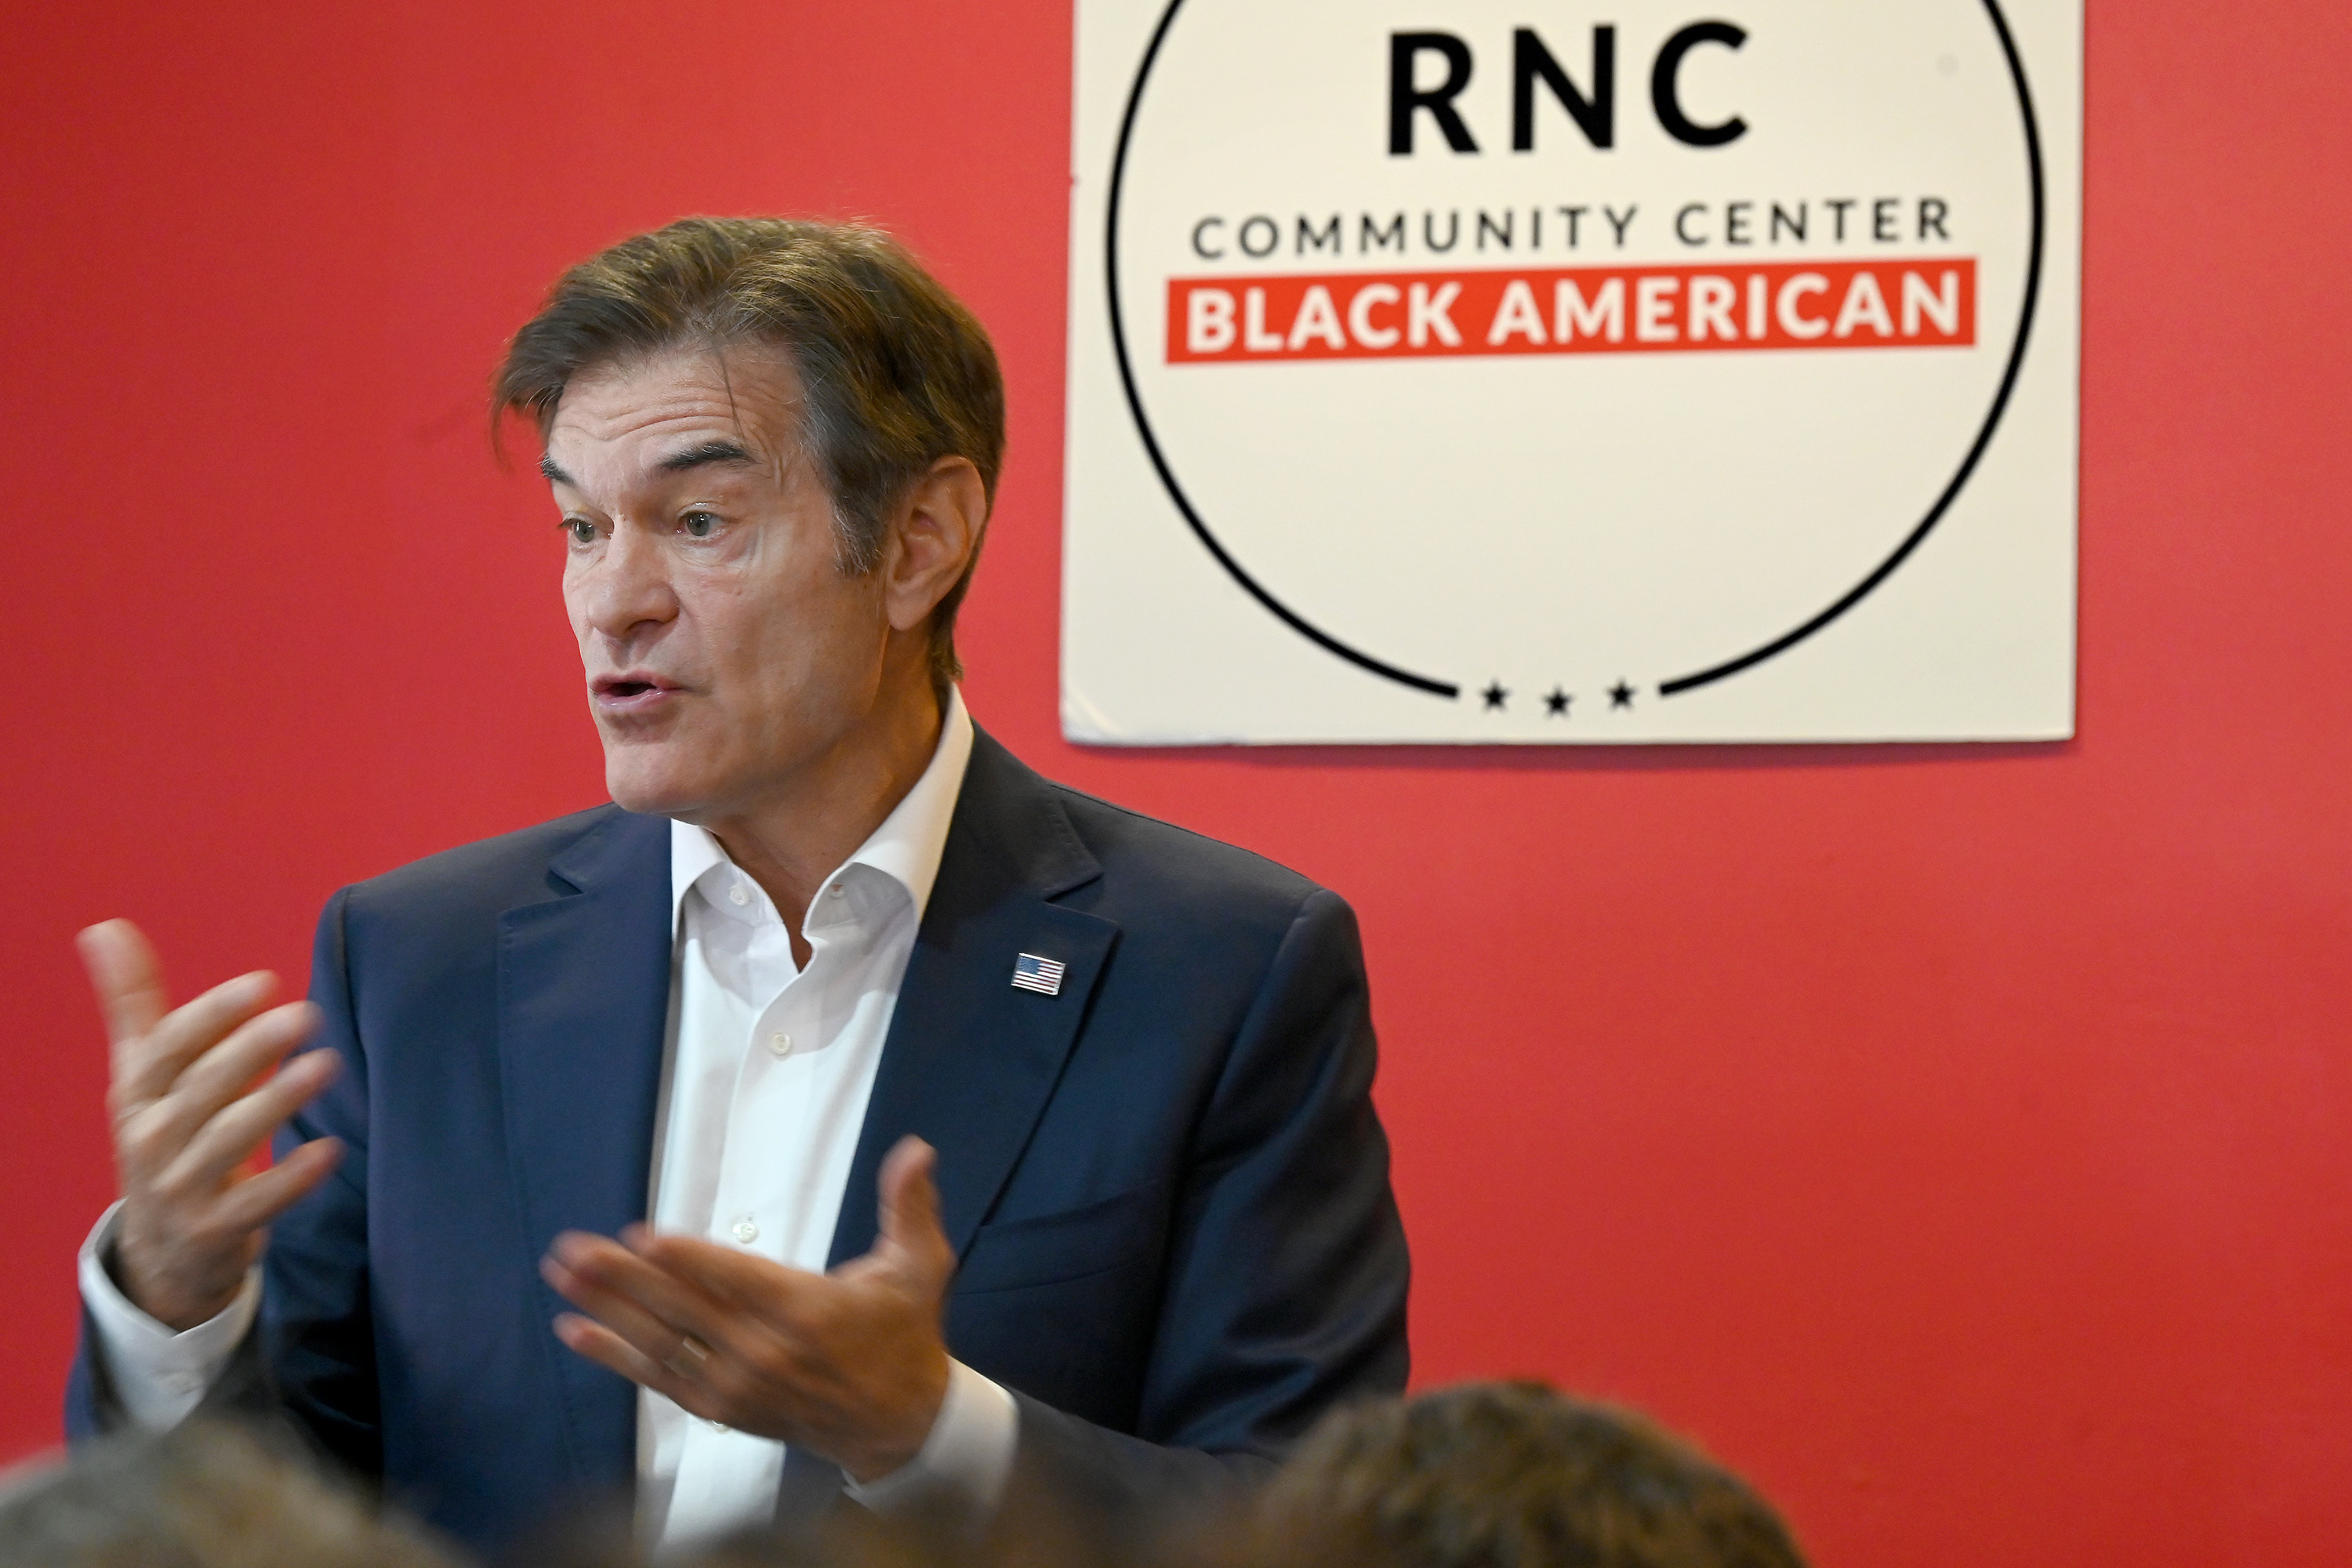 Mehmet Oz, Pennsylvanias Republican Senate candidate, indicates hed vote yes on same-sex marriage bill image